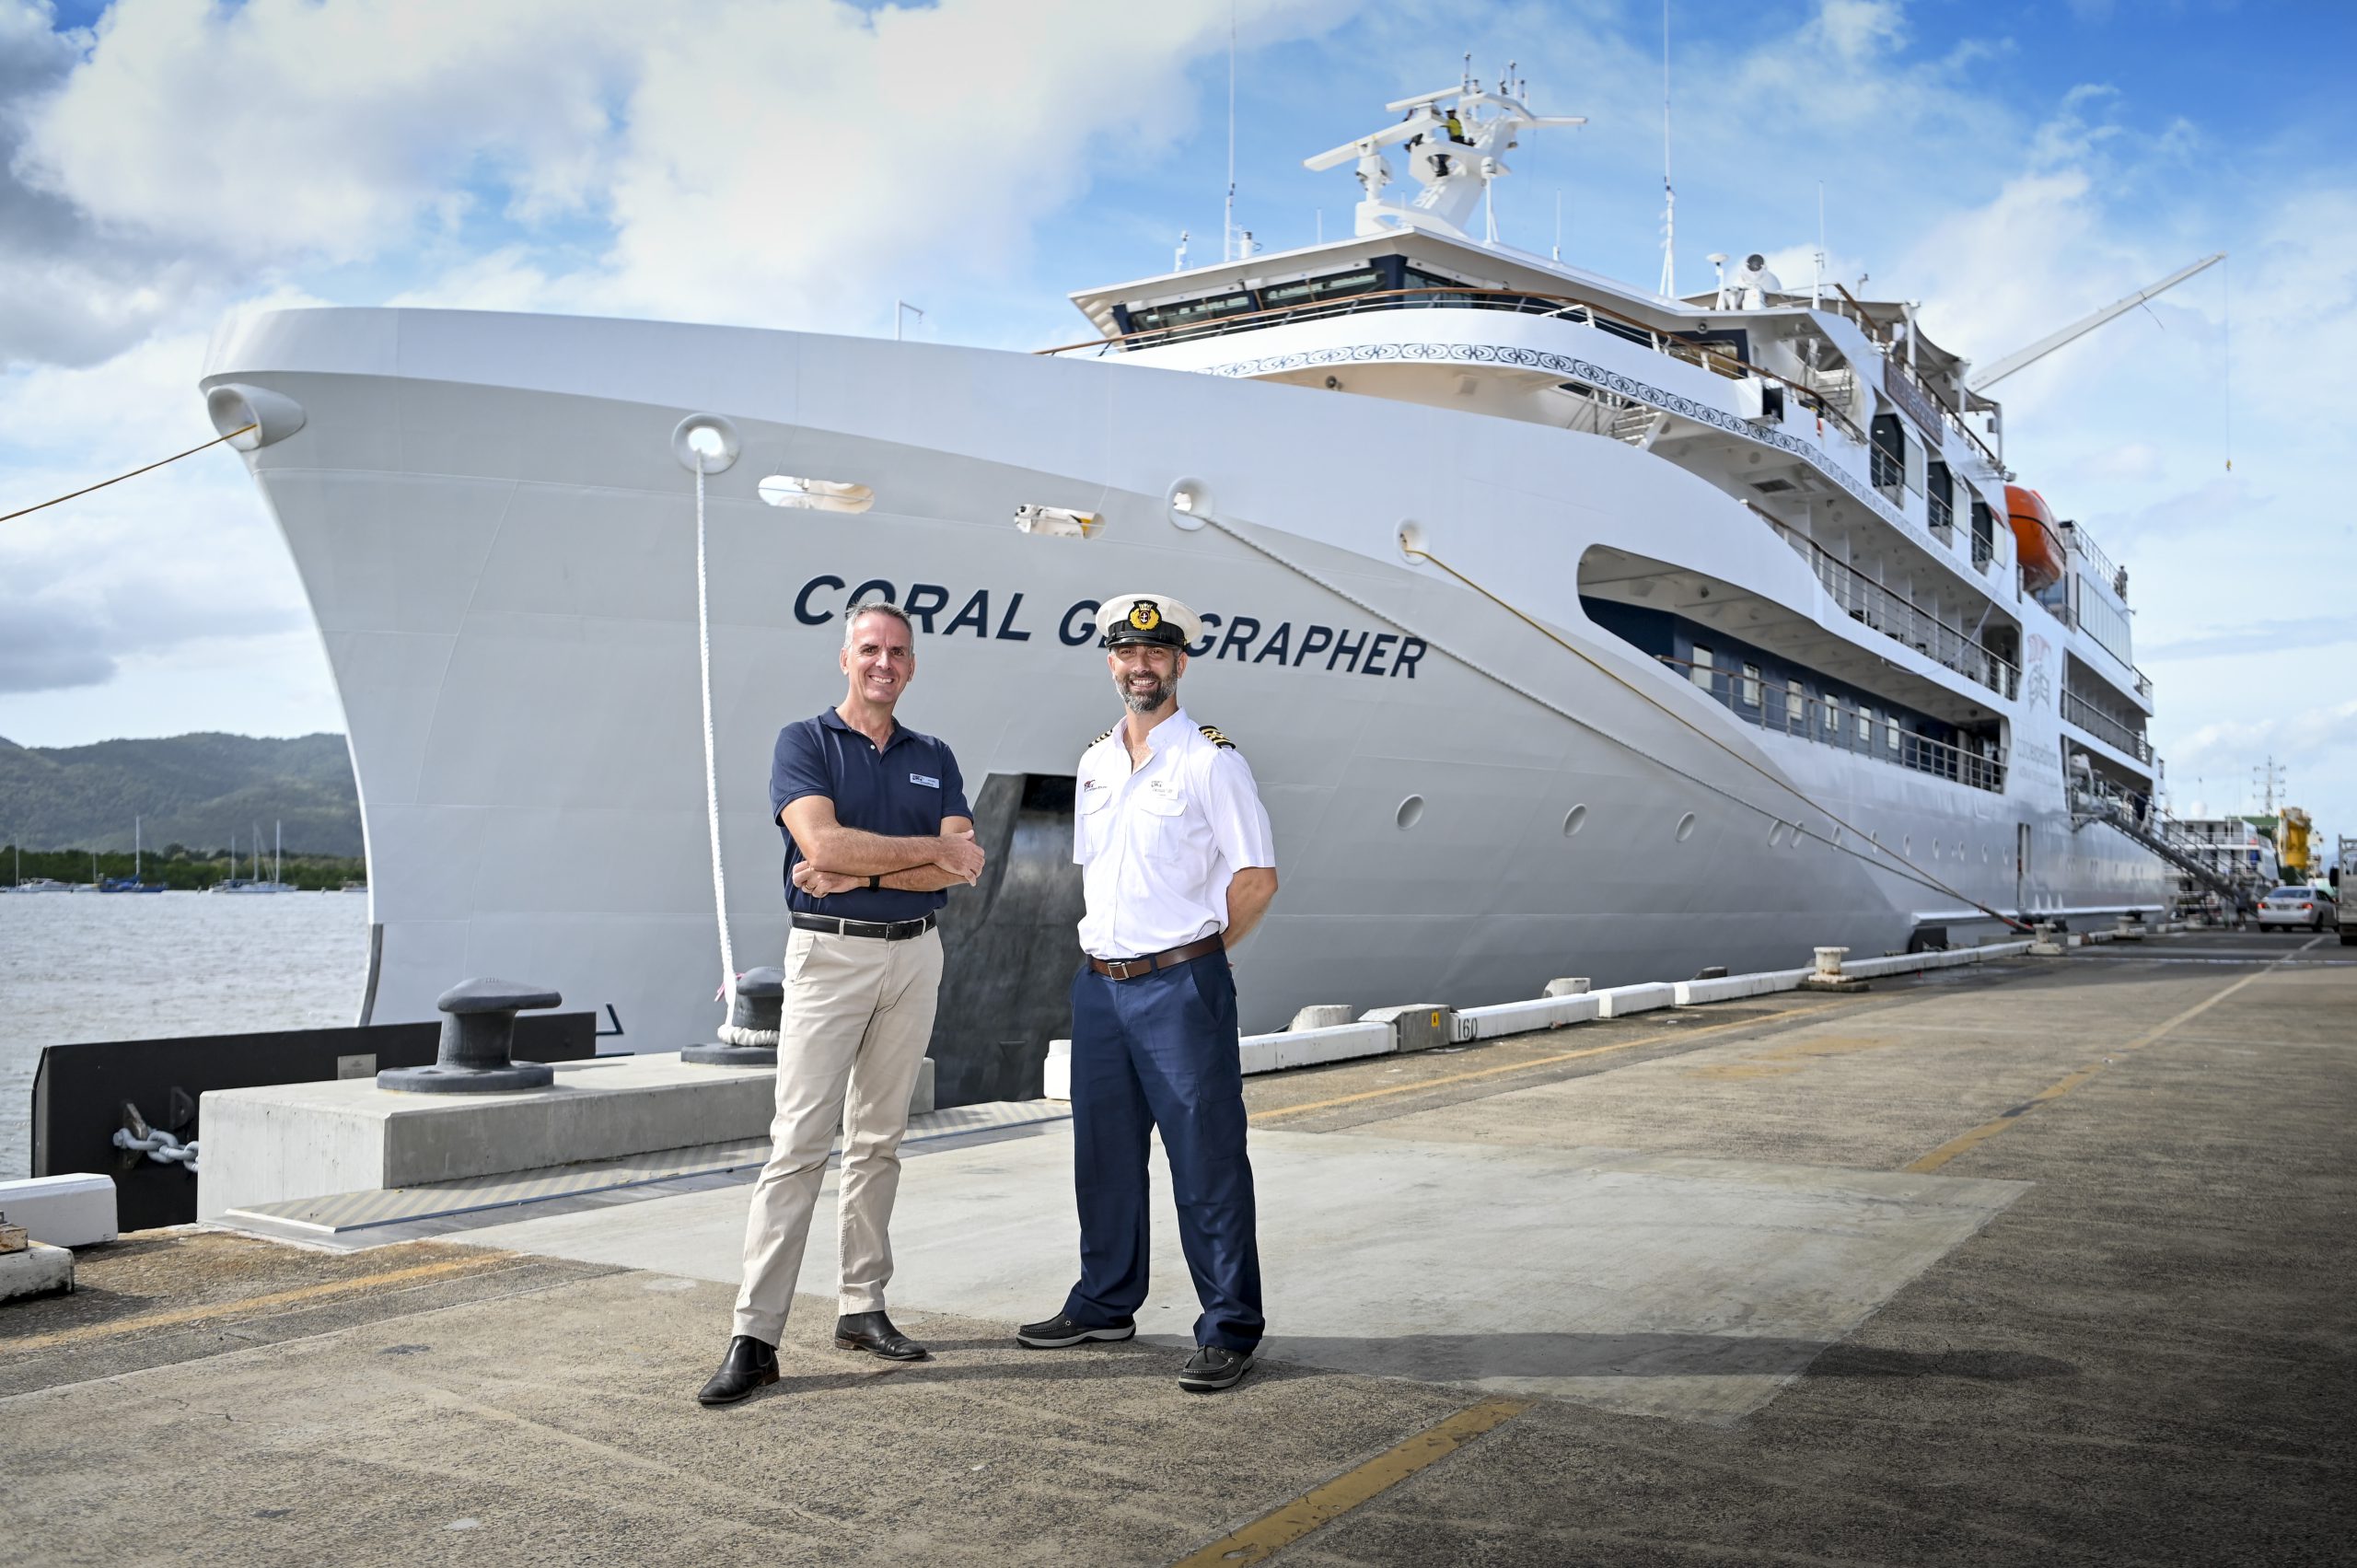 Coral Geographer embarks on her maiden voyage in Cairns